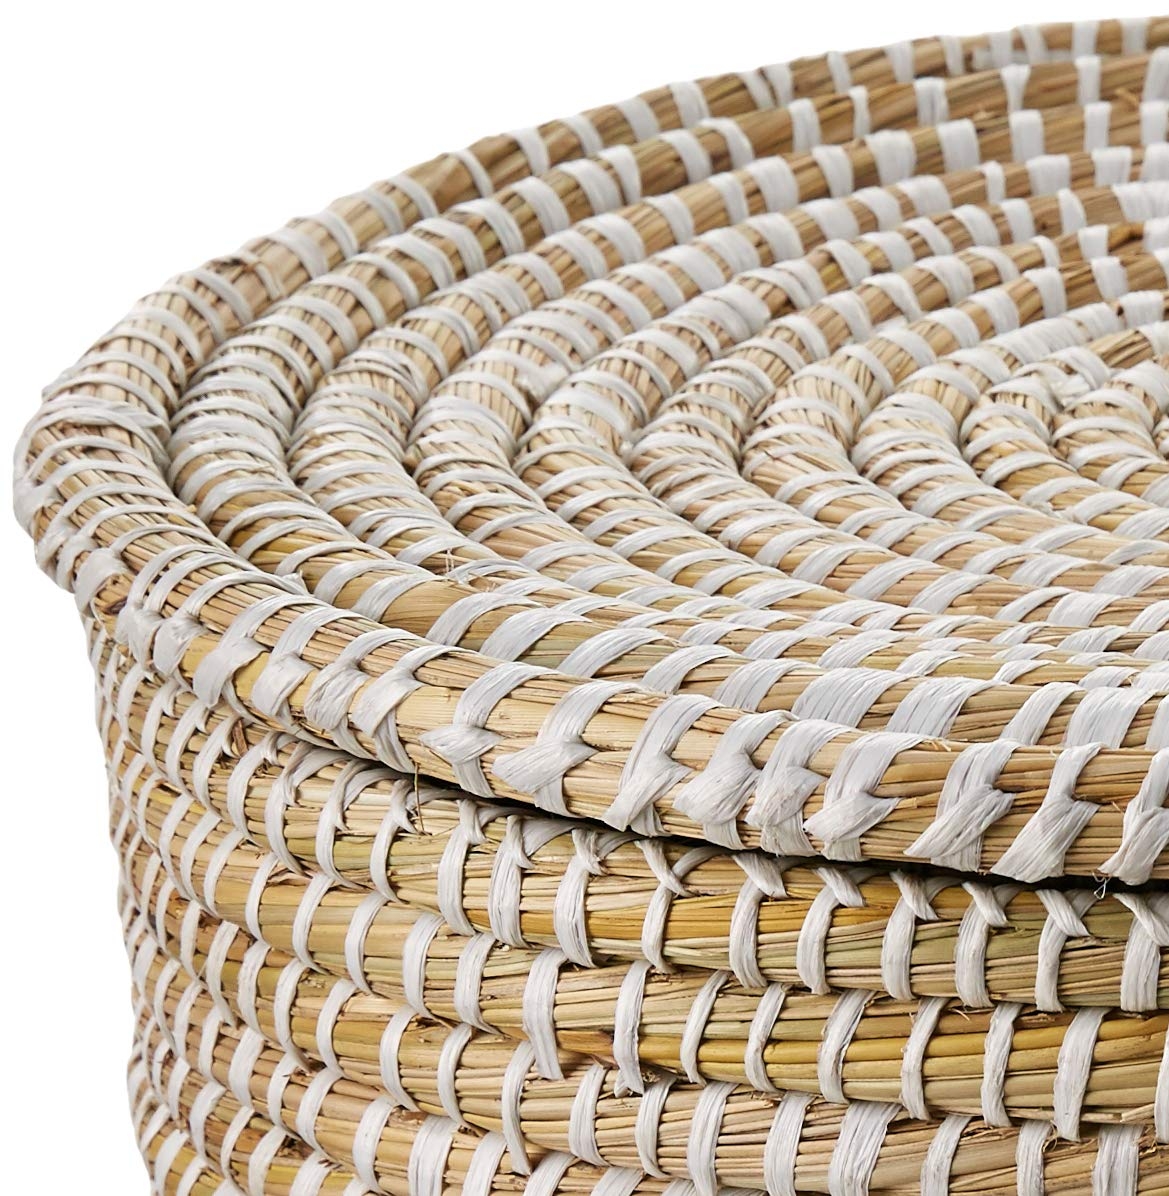 Whitewashed Woven Seagrass Baskets with Lids (Set of 3 Sizes) - Image 2